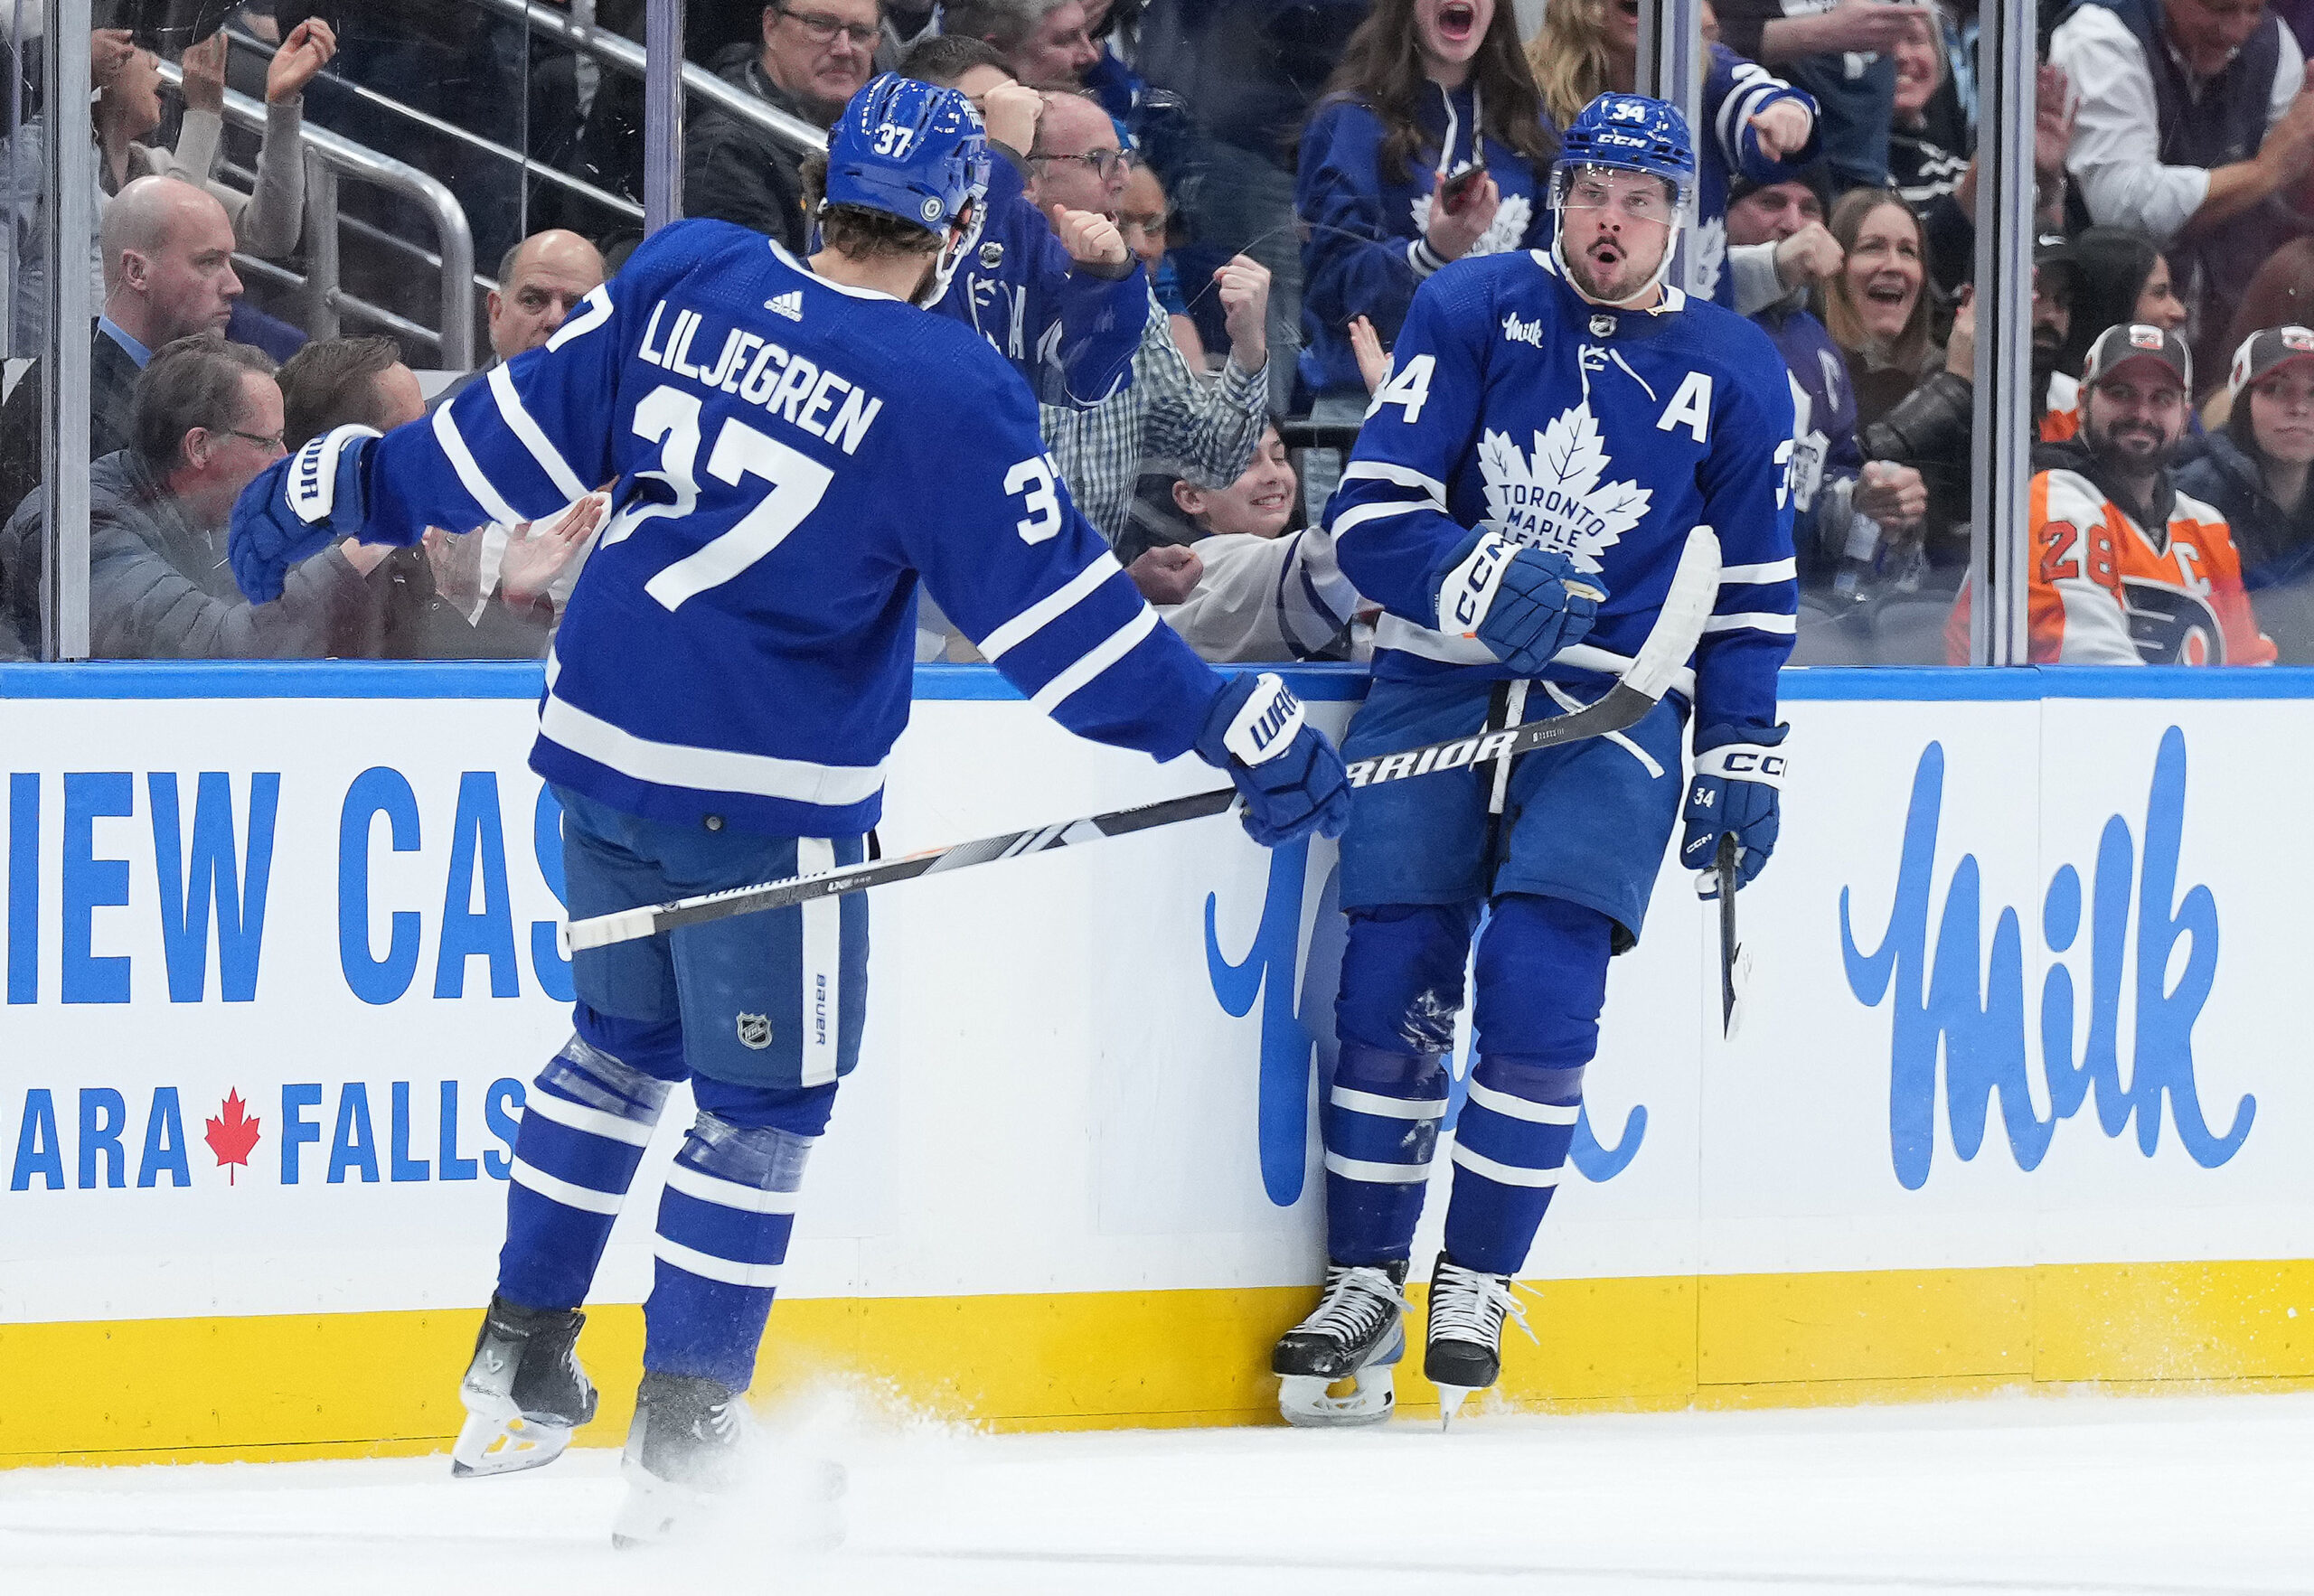 Sheldon Keefe and Maple Leafs Continue Wild Roller Coaster Ride